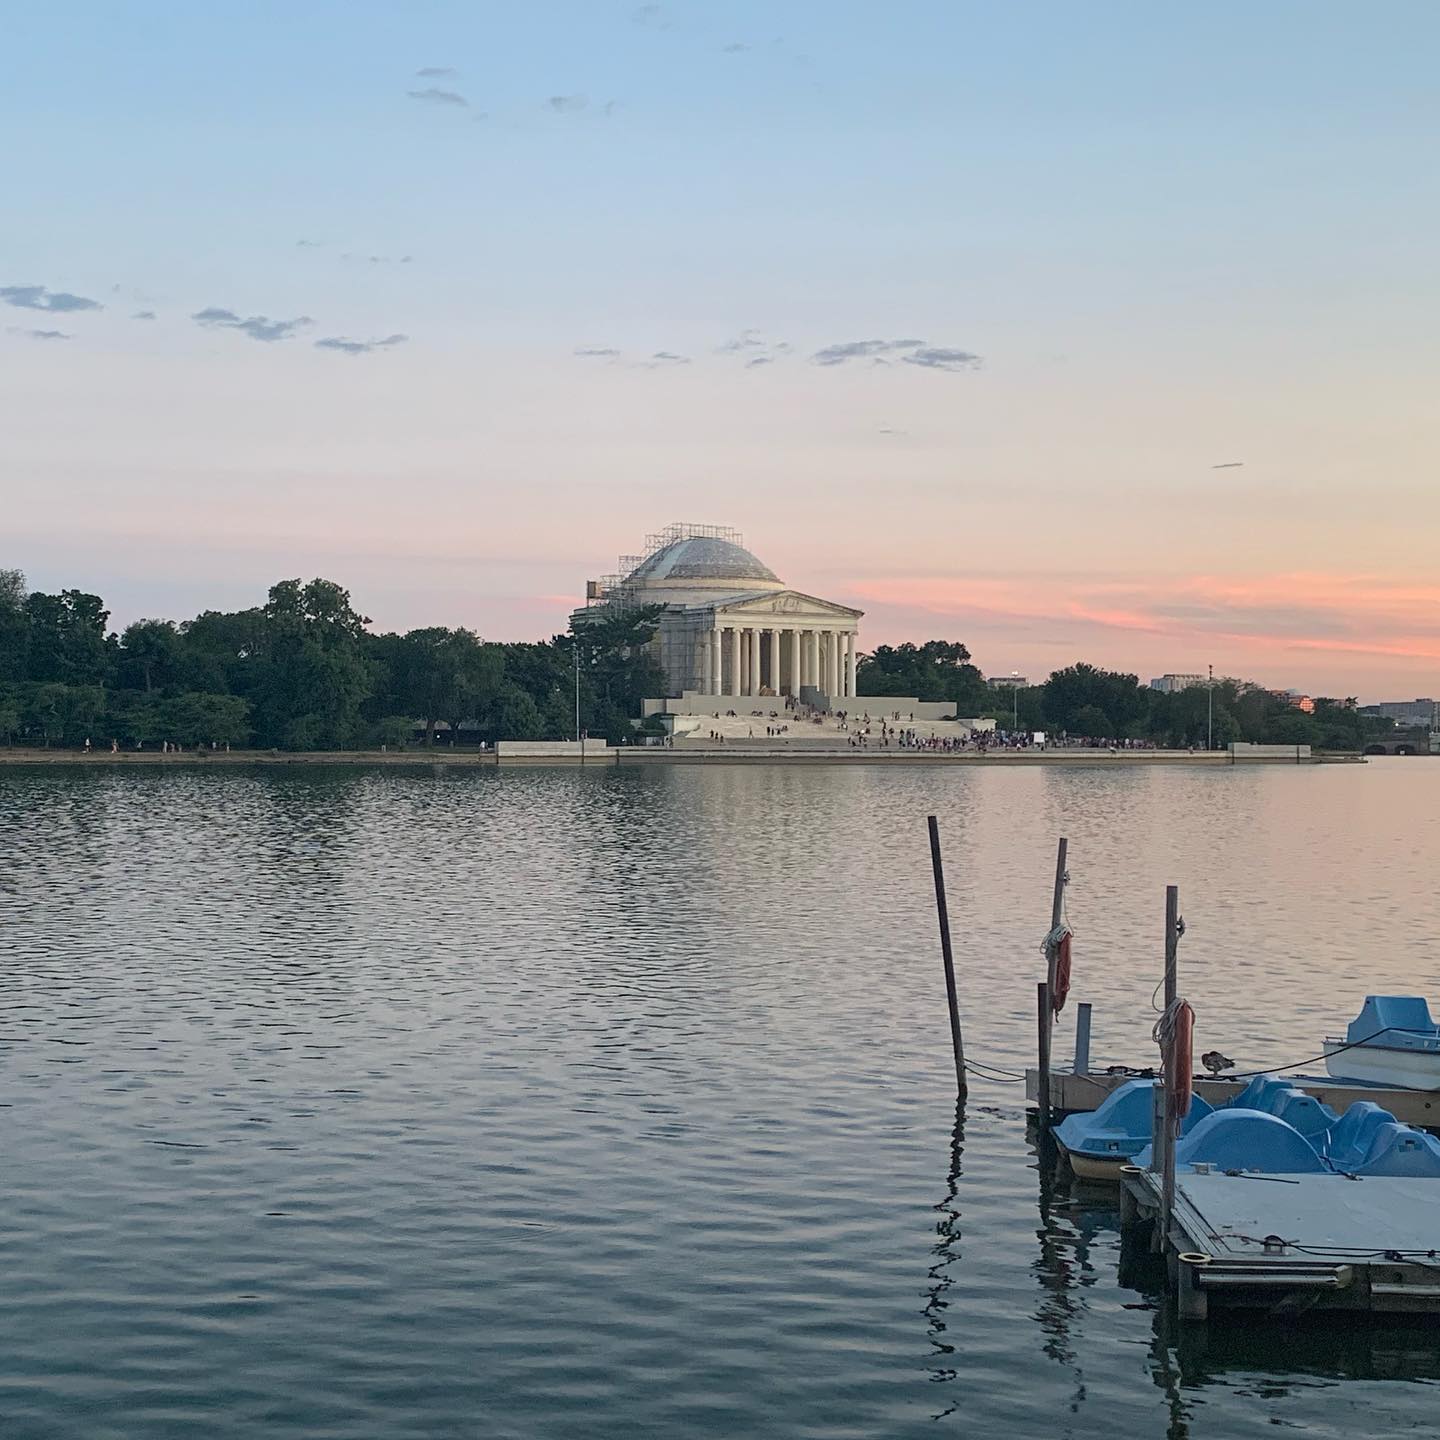 Wow! What a wonderful view 😍 
 
Travelling for me represents freedom, gives me happiness ☺️ and I always look forward to getting to see as much I can of my destination.

What is your favourite place? 

#washingtondc #travelphotography #travelblogger #travelgram #traveling #budgetlisttravel #postcardsfromtheworld #traveldeeper  #travelstroke #travelling #trip #traveltheworld #travelblog #instago #travelpics #tourist#beauty #amazing #arountheworld #tourist #instago #worldcaptures #tourism #worldplaces #worldingram #traveller #traveler